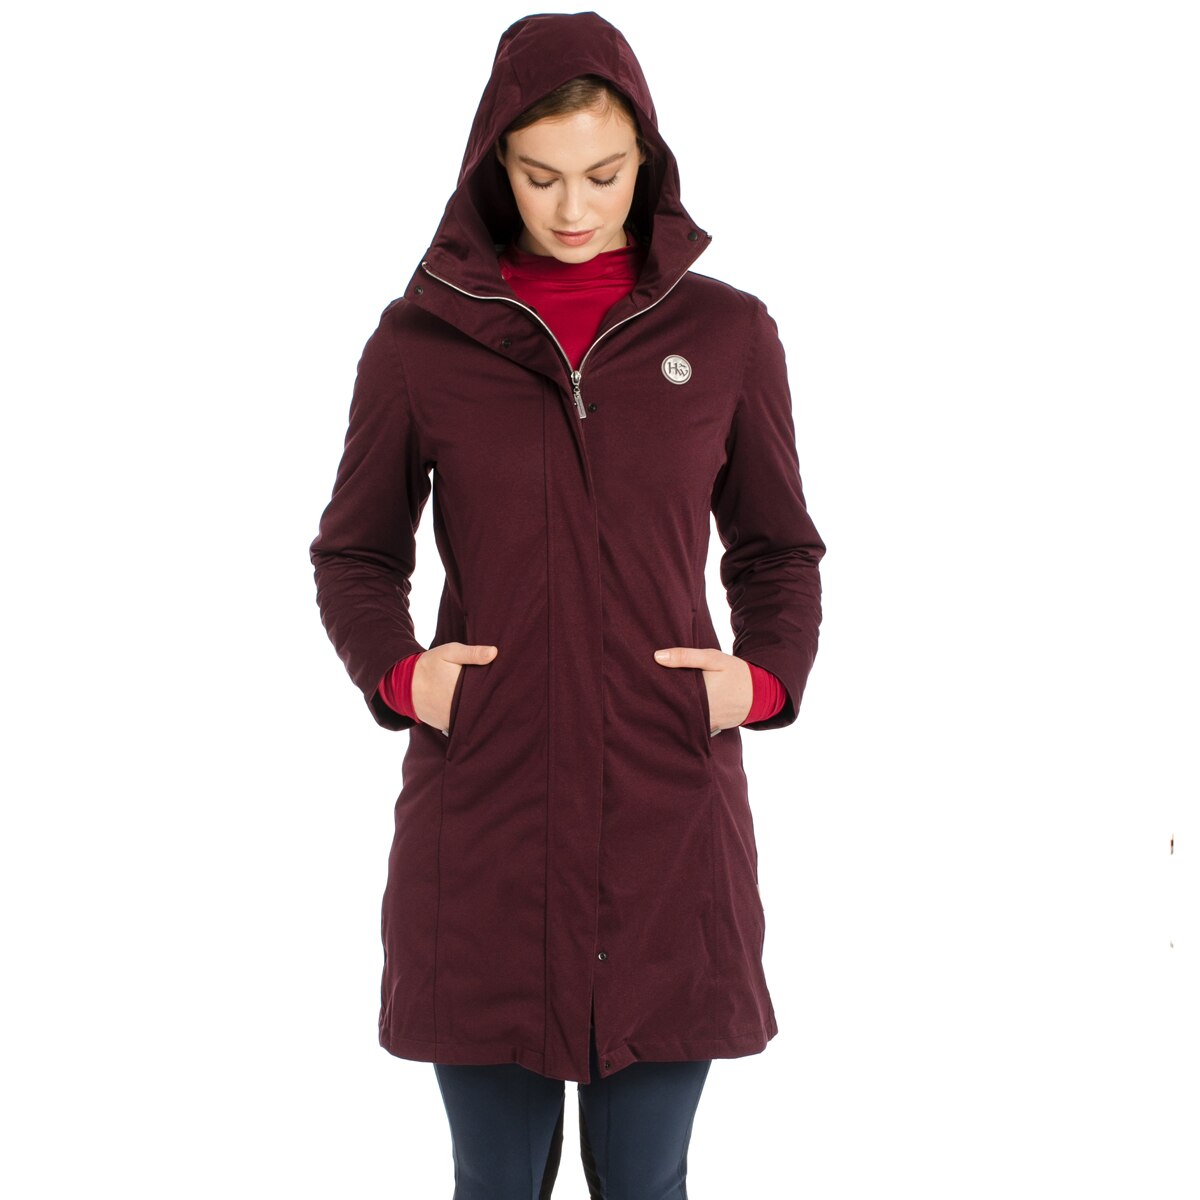 Horseware Ireland H2O Waterproof Parka with Removable Hood and Full Zip 